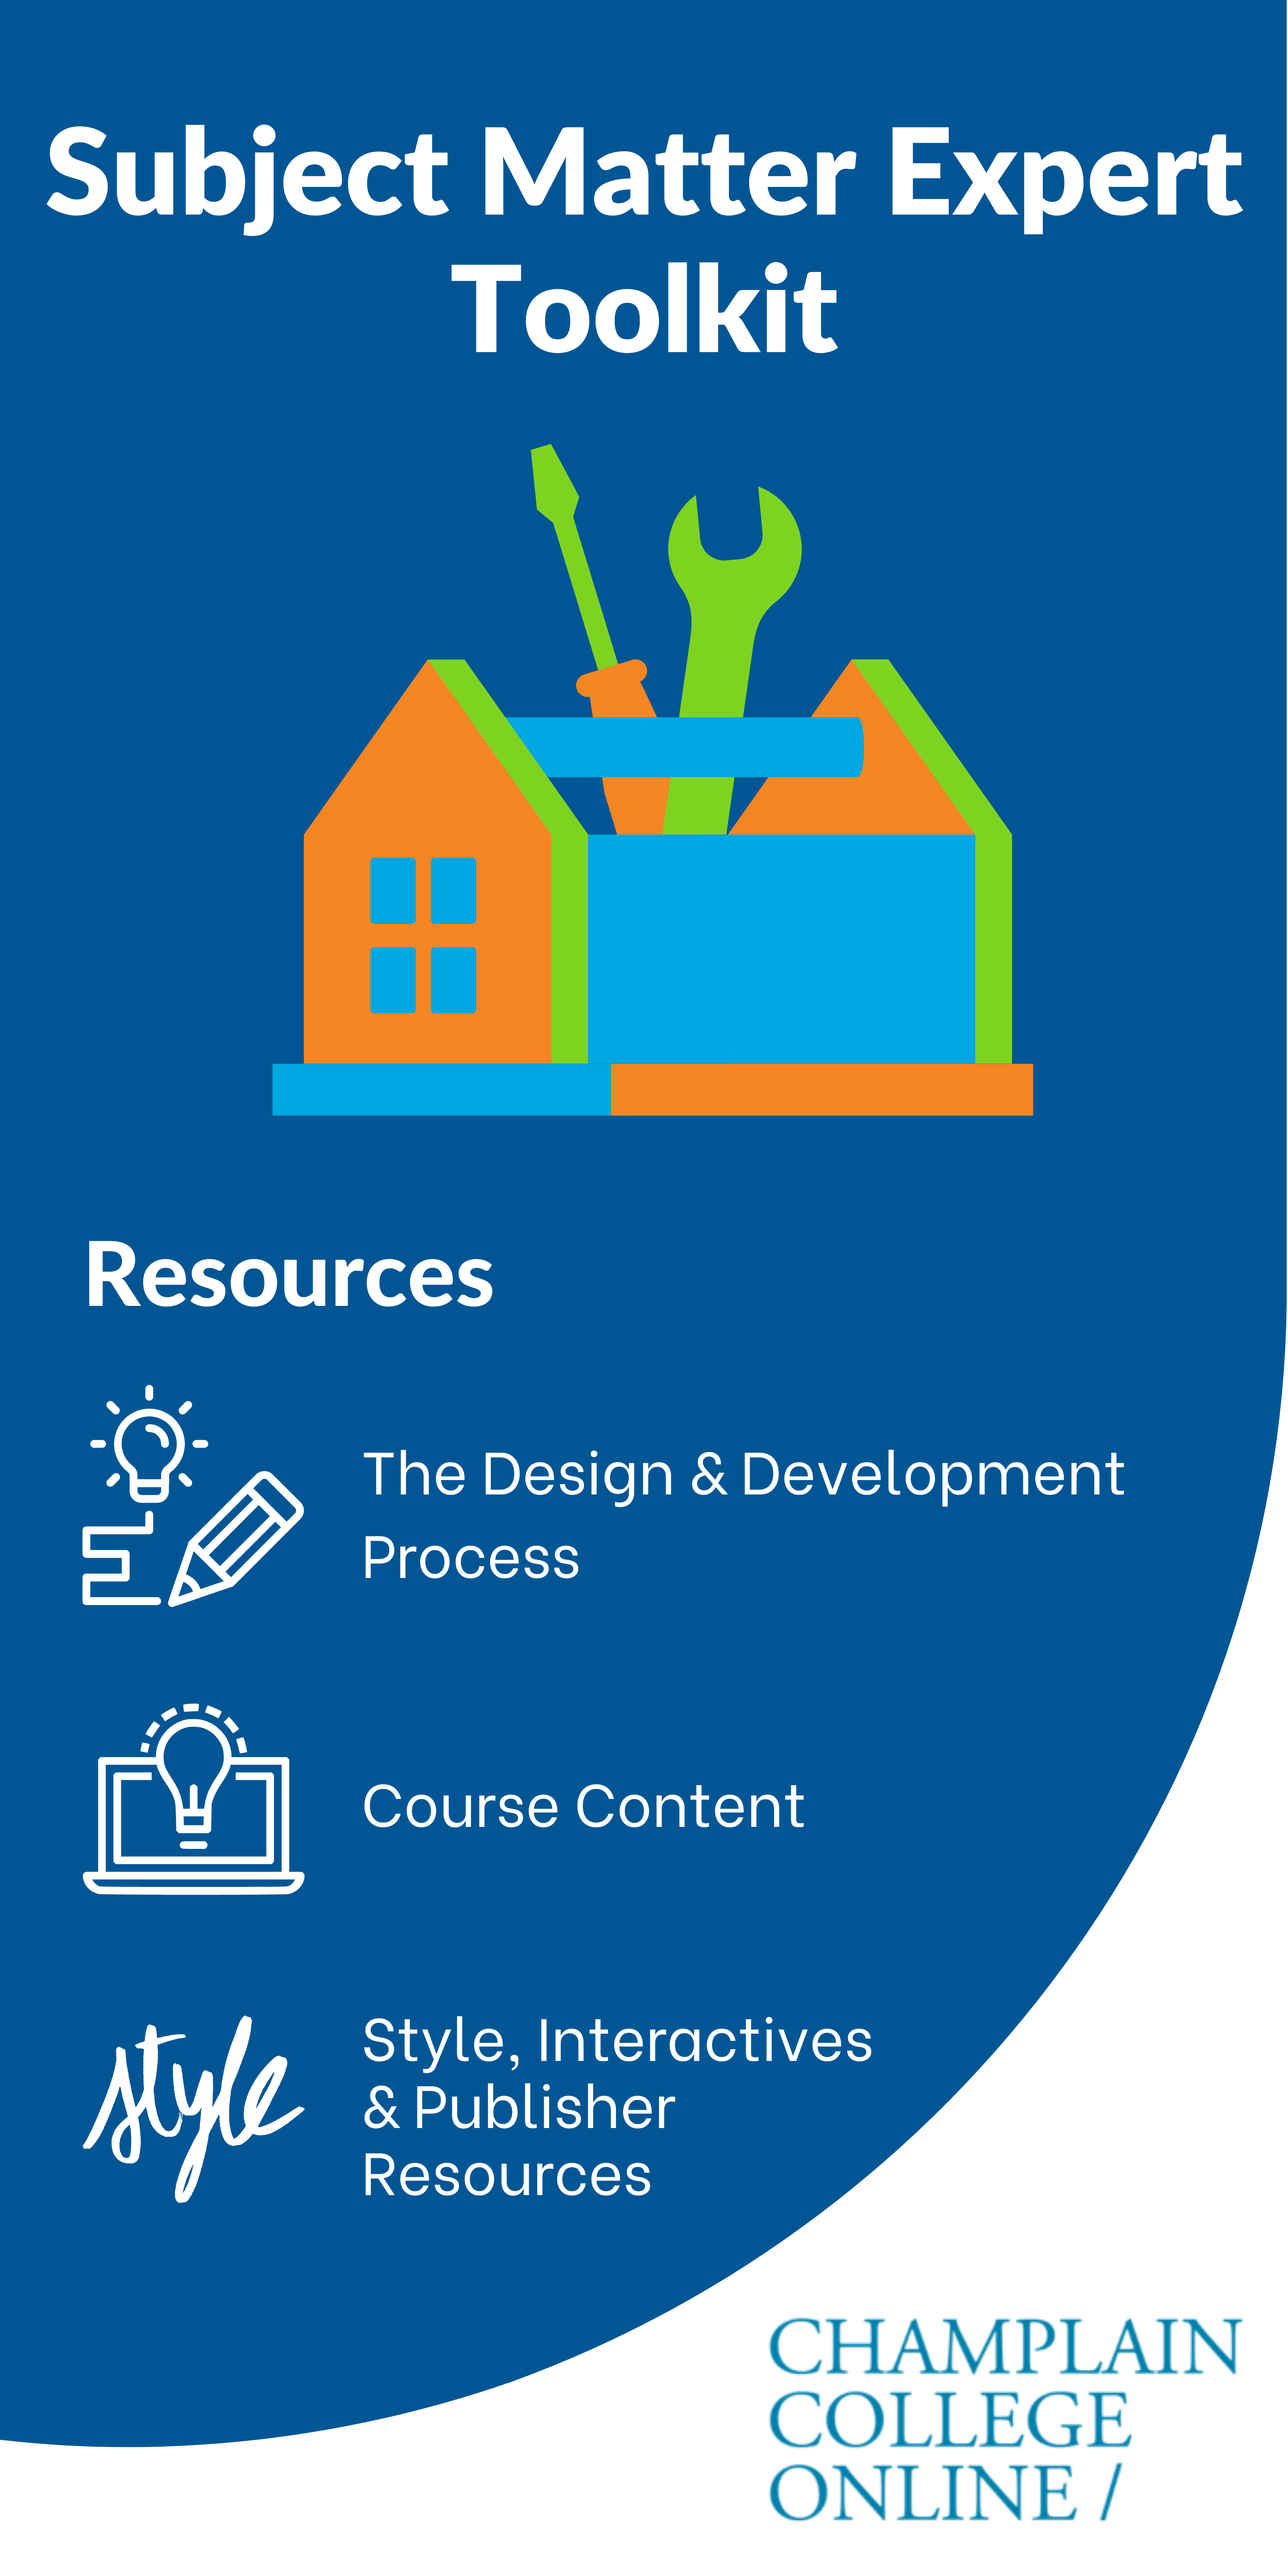 SME Toolkit: Design & Development Process, Course Content, and Style, Interactives & Publisher Resources